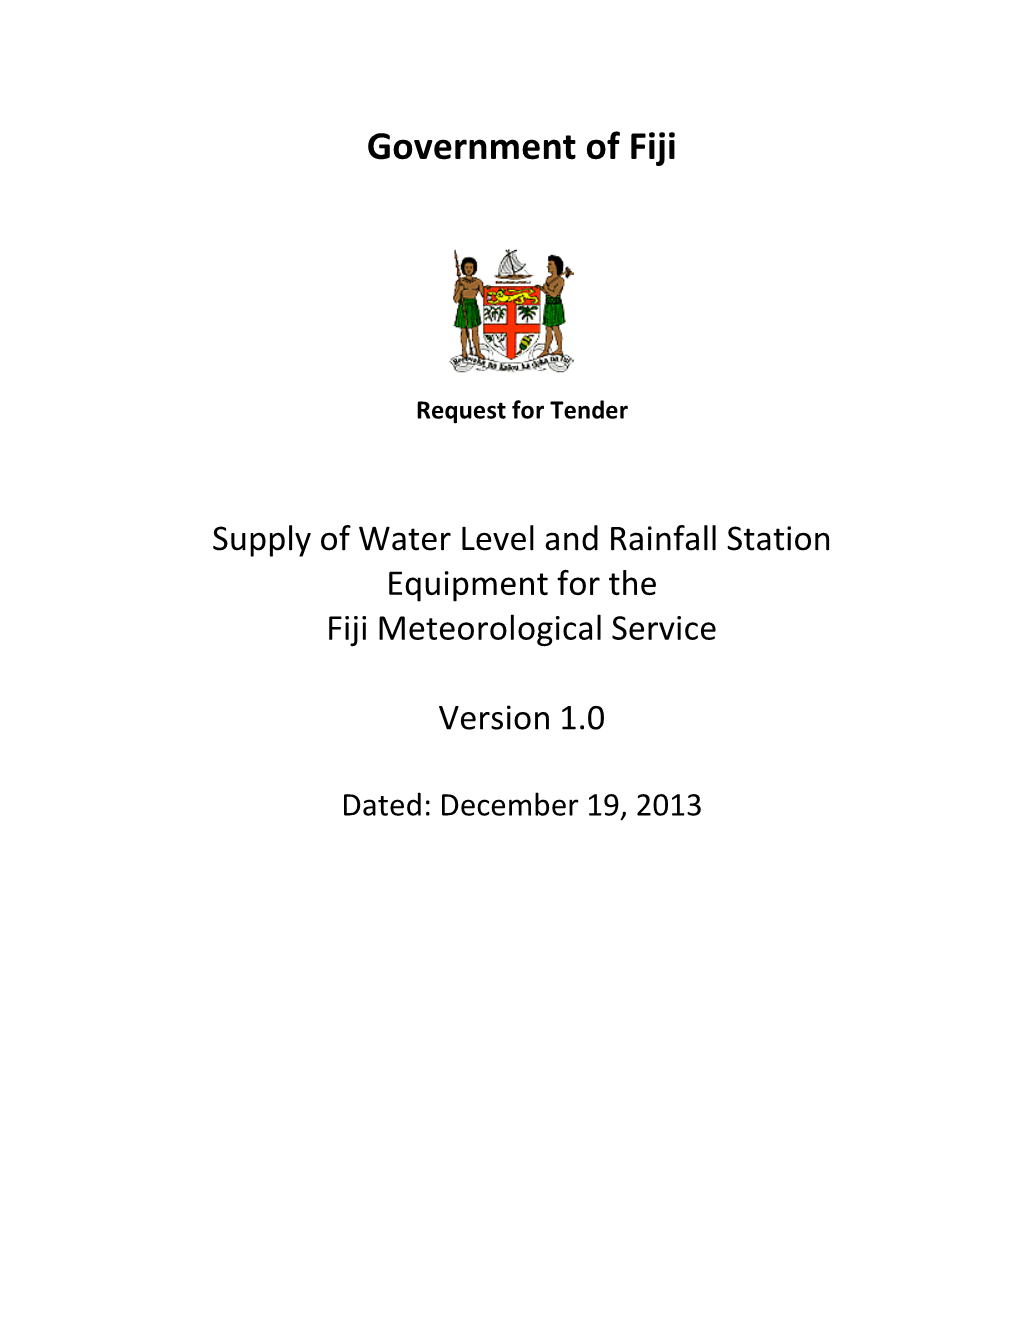 Supply of Water Level and Rainfall Station Equipment for the Fiji Meteorological Service